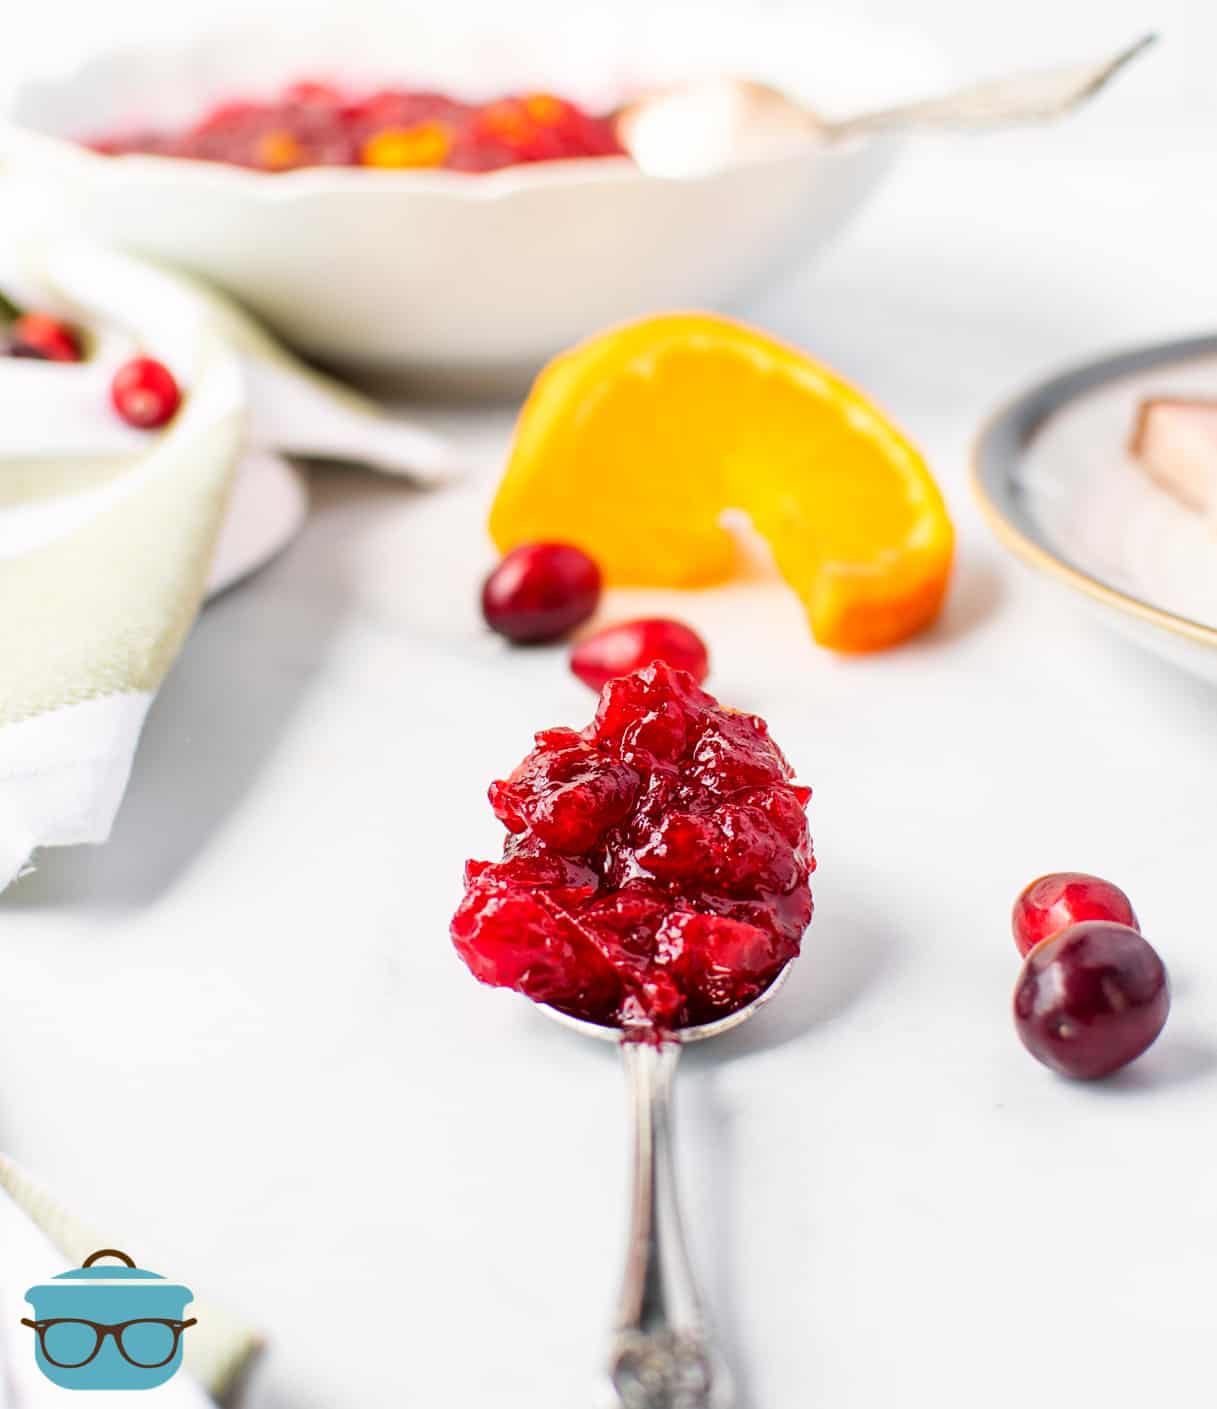 Cranberry sauce shown on a serving spoon on a white table with fresh cranberries scattered around.